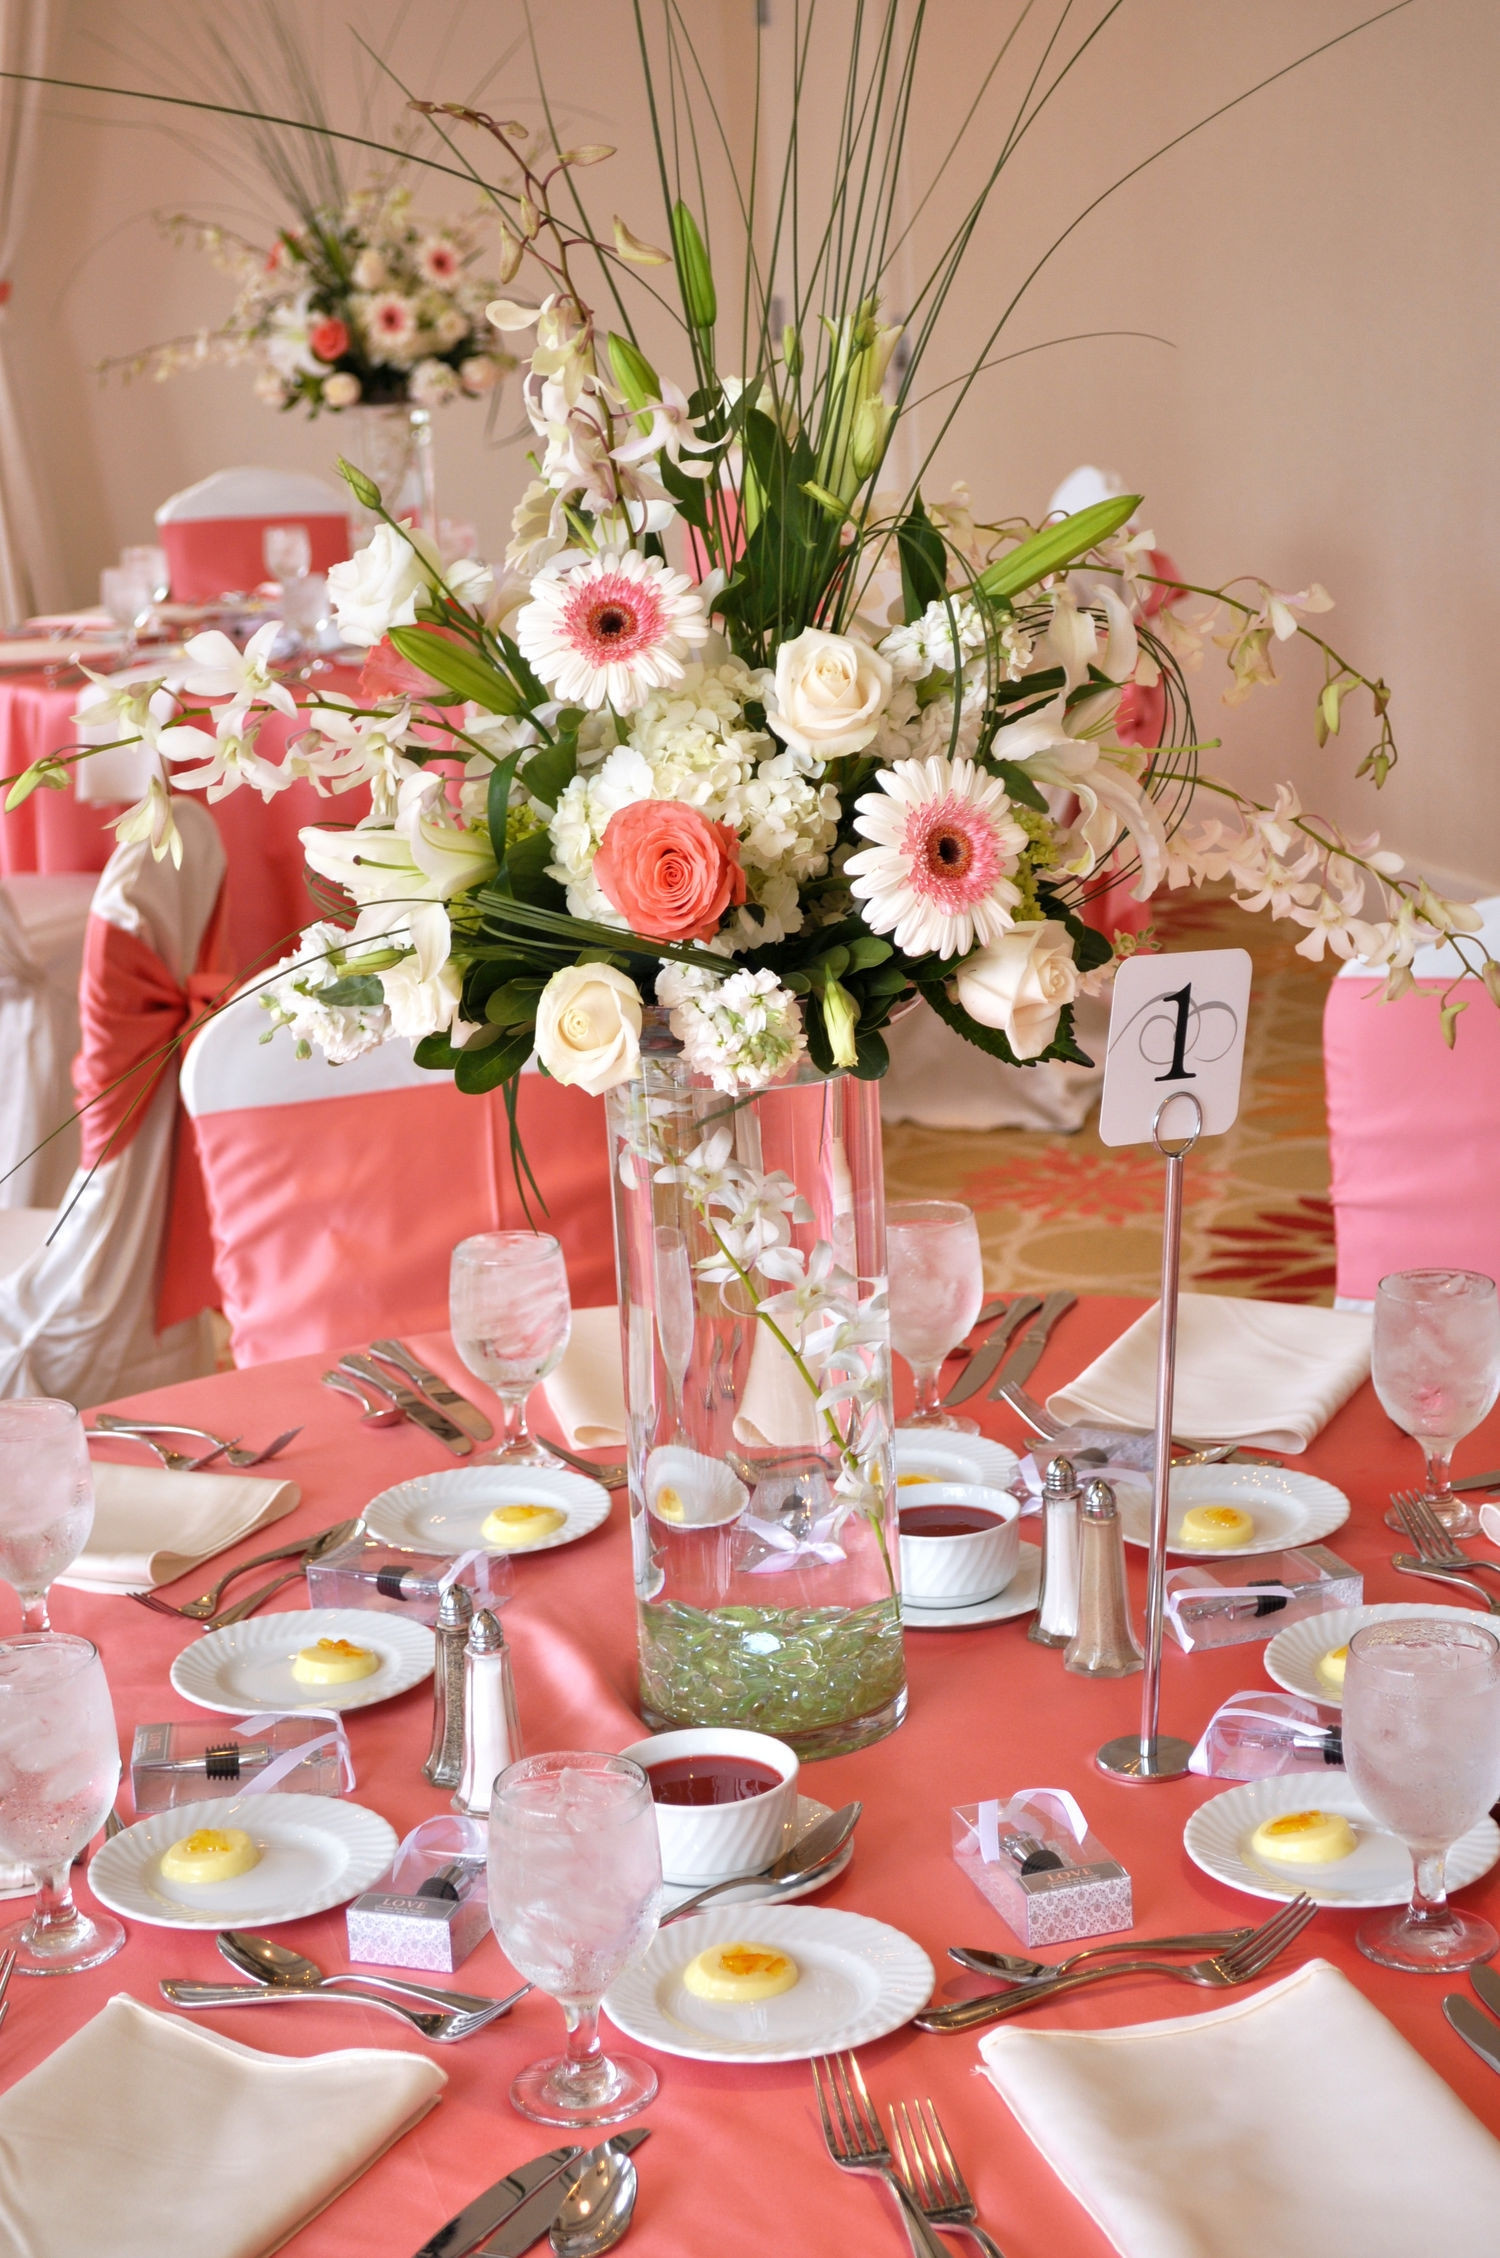 Coral Wedding Decorations
 How To Choose The Right Wedding Centerpieces For Round